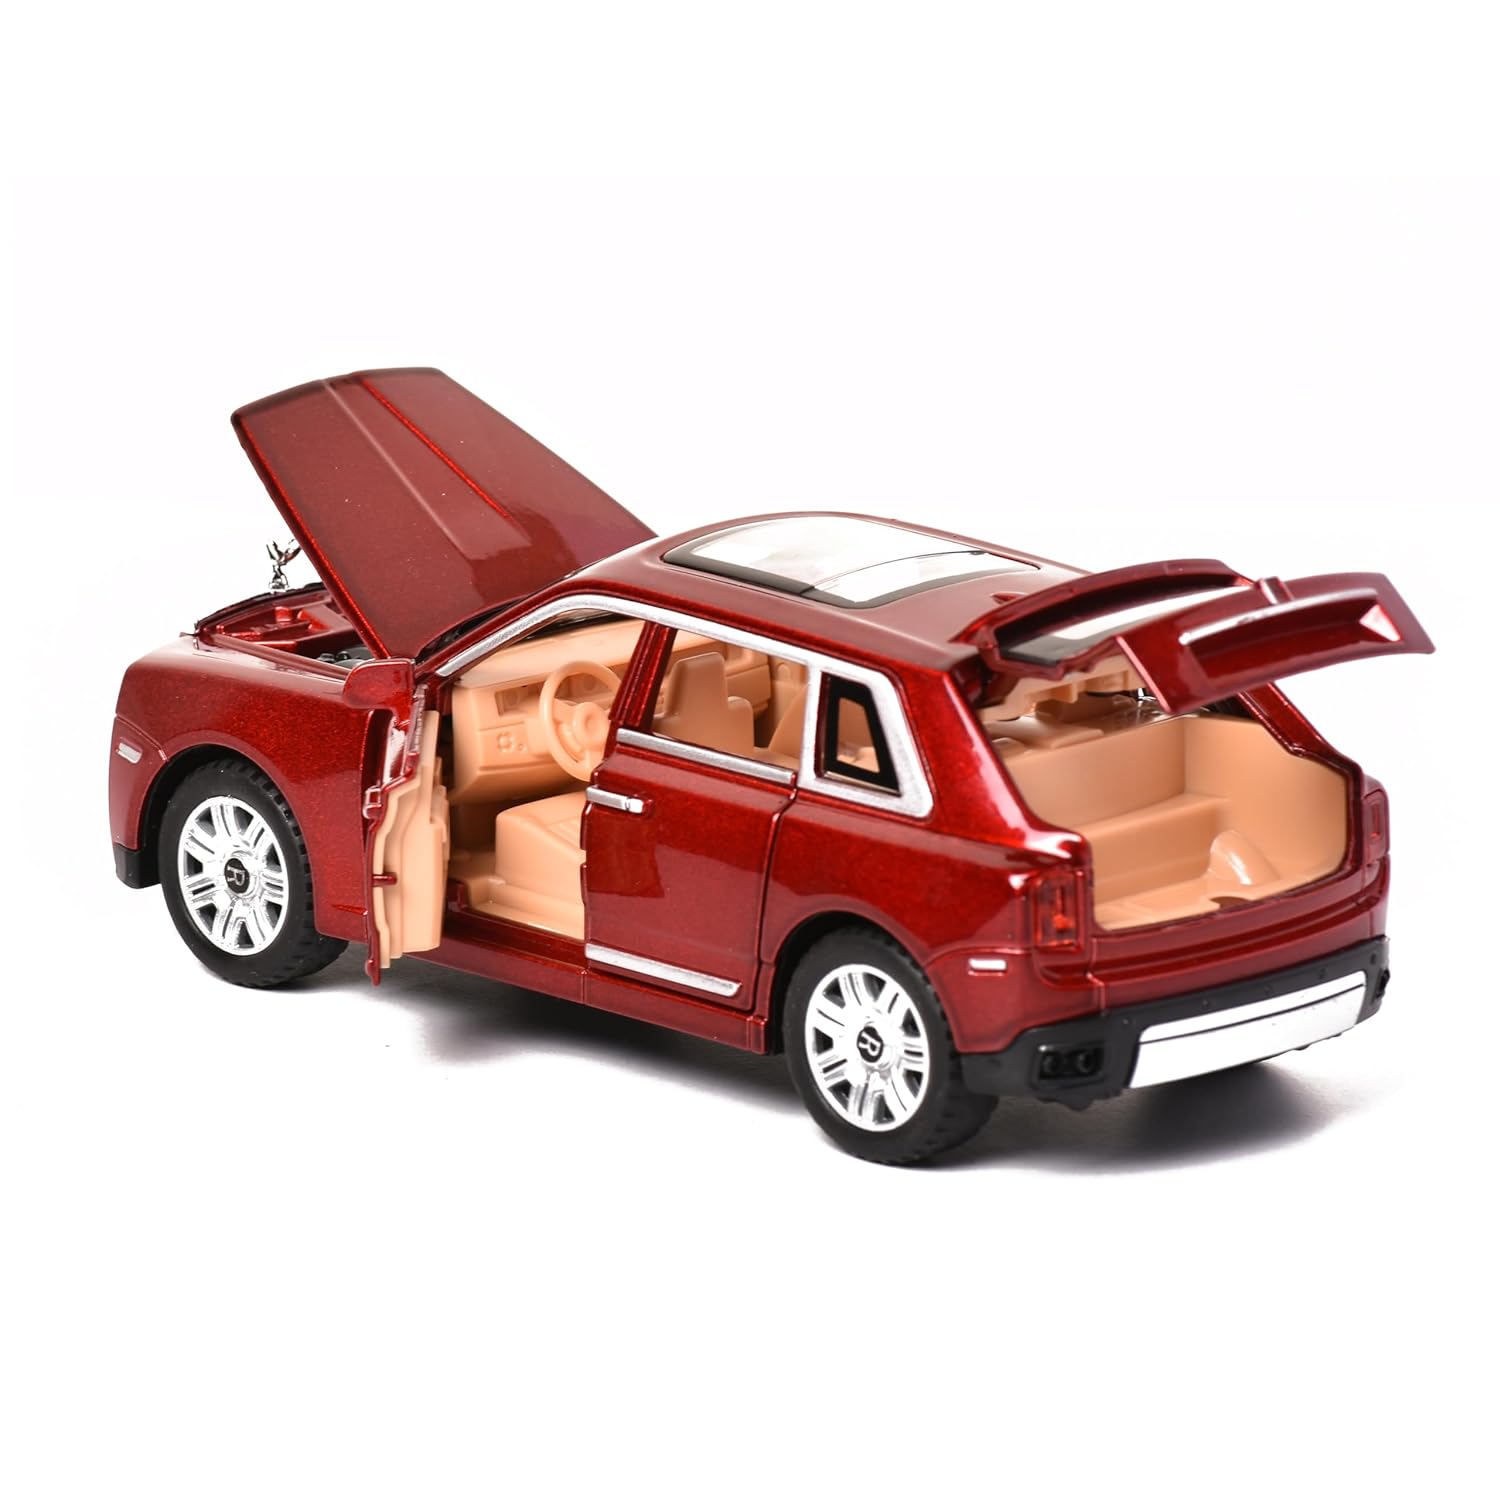 Braintastic Model Diecast Car Toy Vehicle Pull Back Friction Car with Openable Doors Light & Music Toys for Kids Age 3+ Years (Rolls Royce Red)